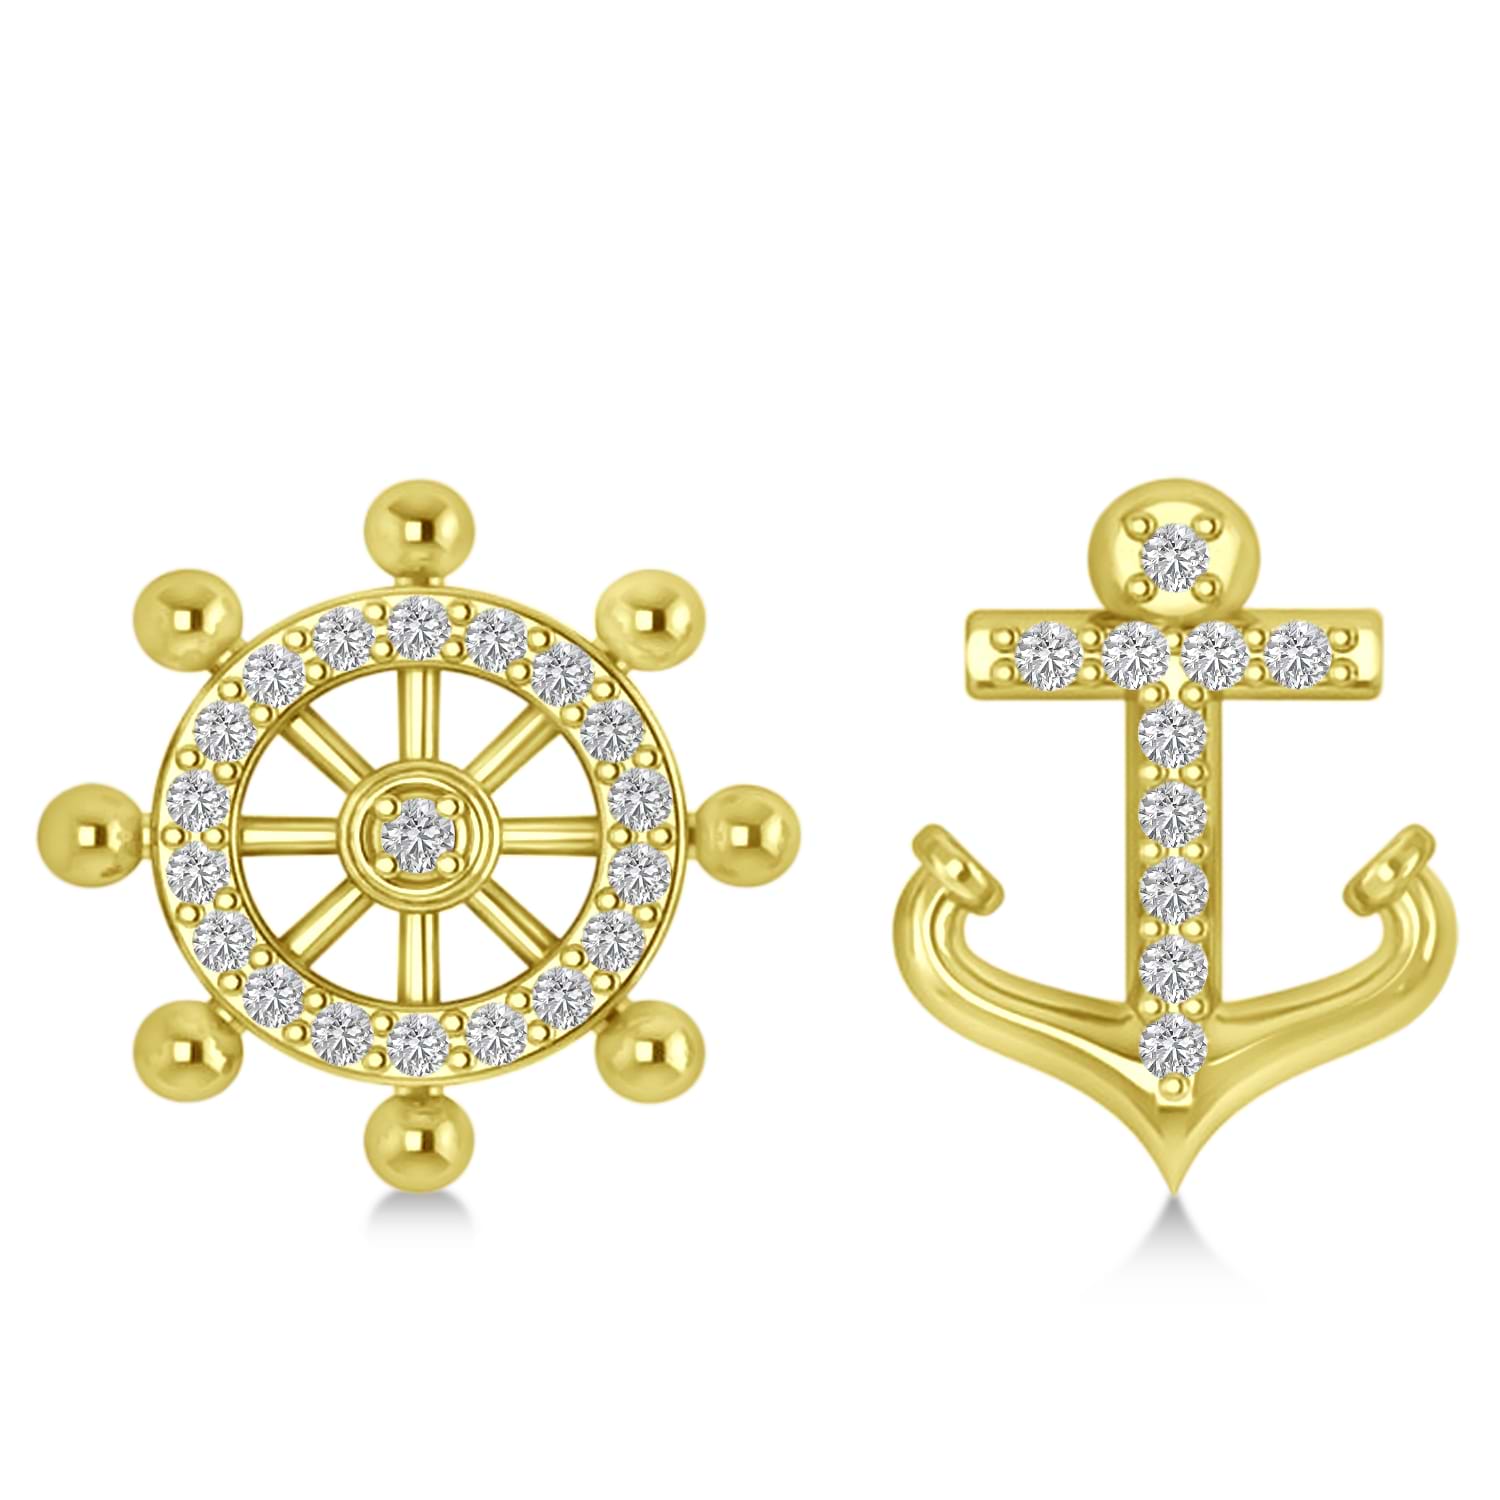 Anchor & Ship's Wheel Diamond Mismatched Earrings 14k Yellow Gold (0.21ct)